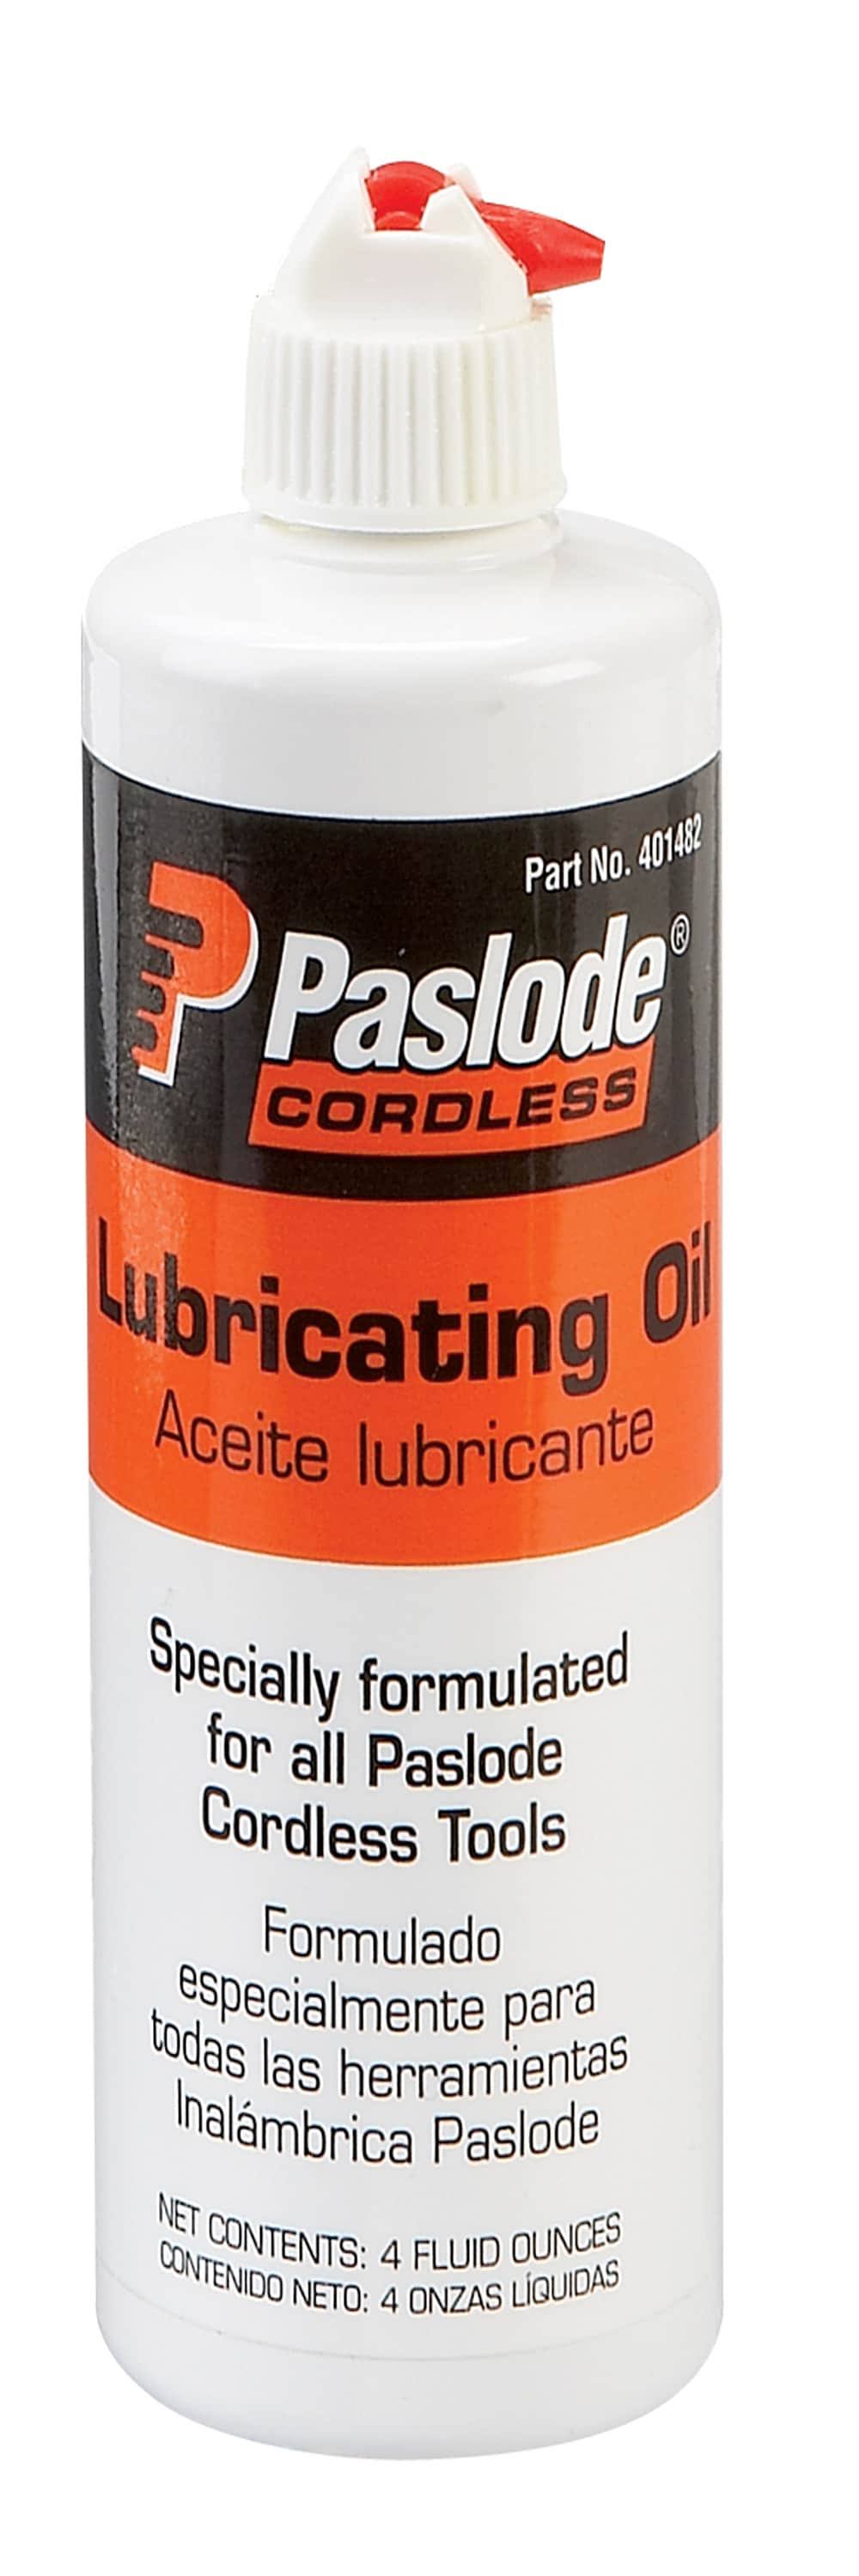 Paslode Cordless Tool Lubrication Oil